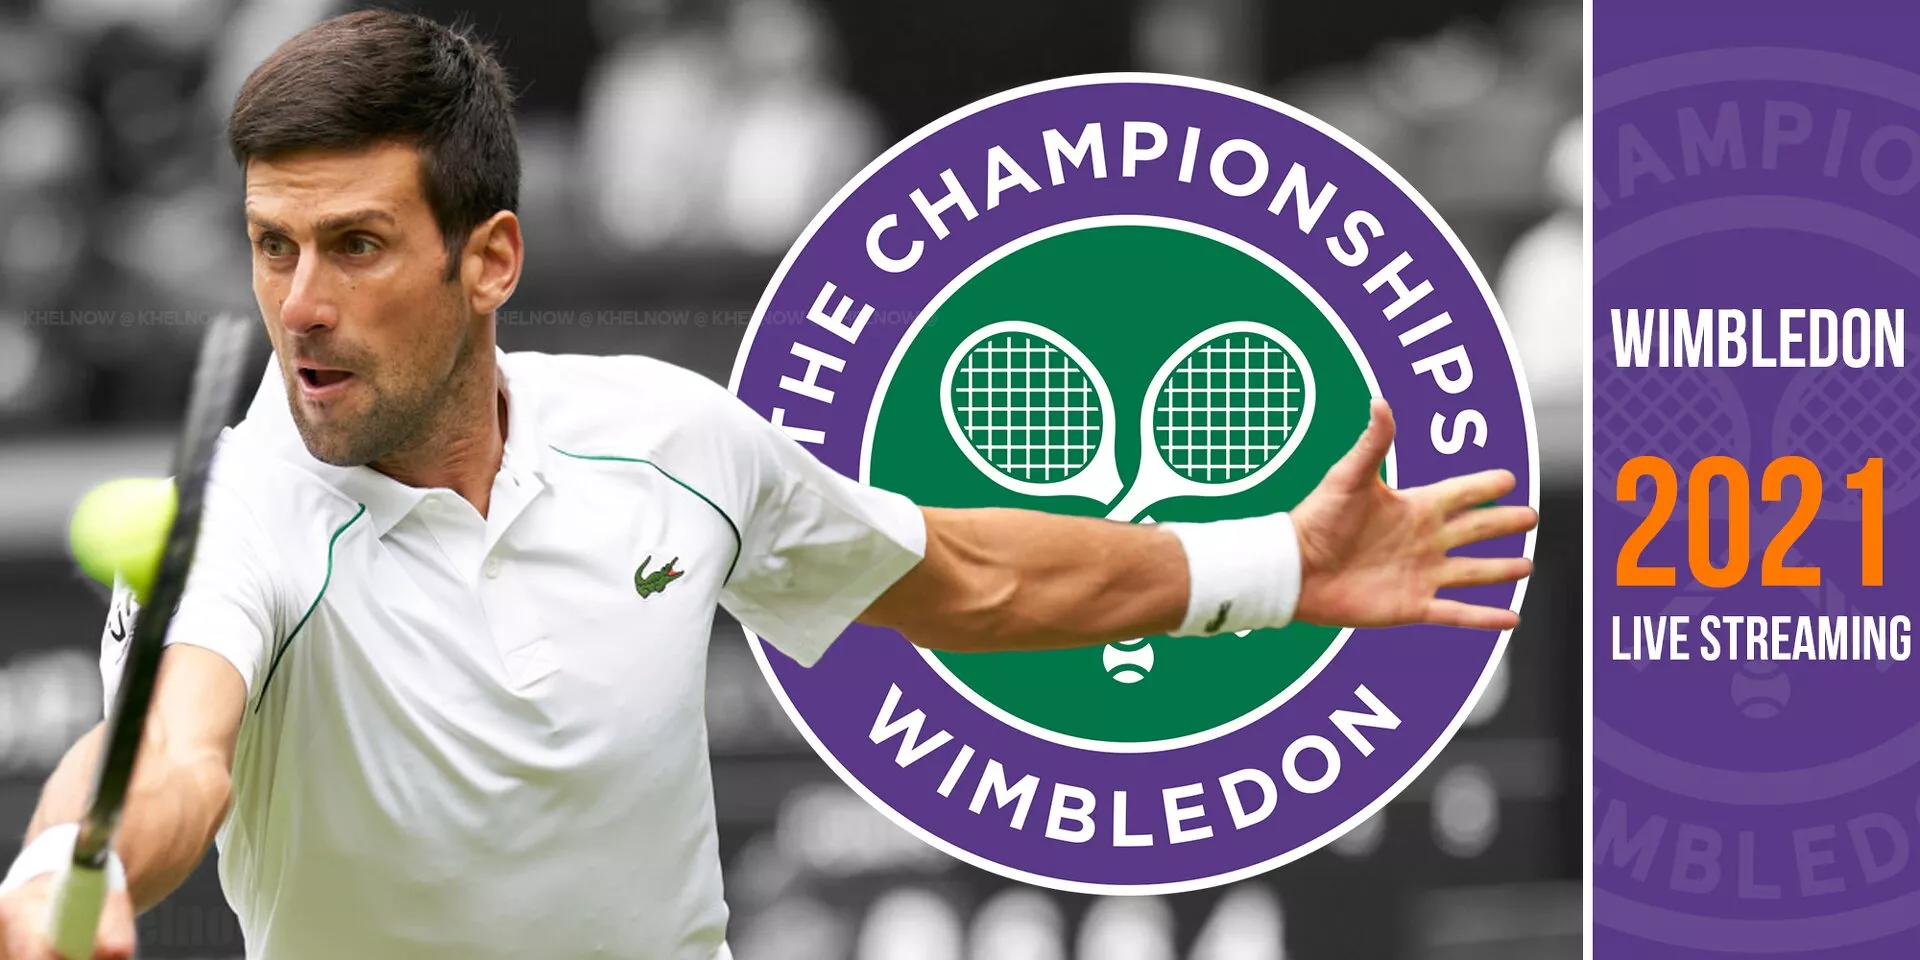 Wimbledon 2021 Day 5 live streaming and telecast